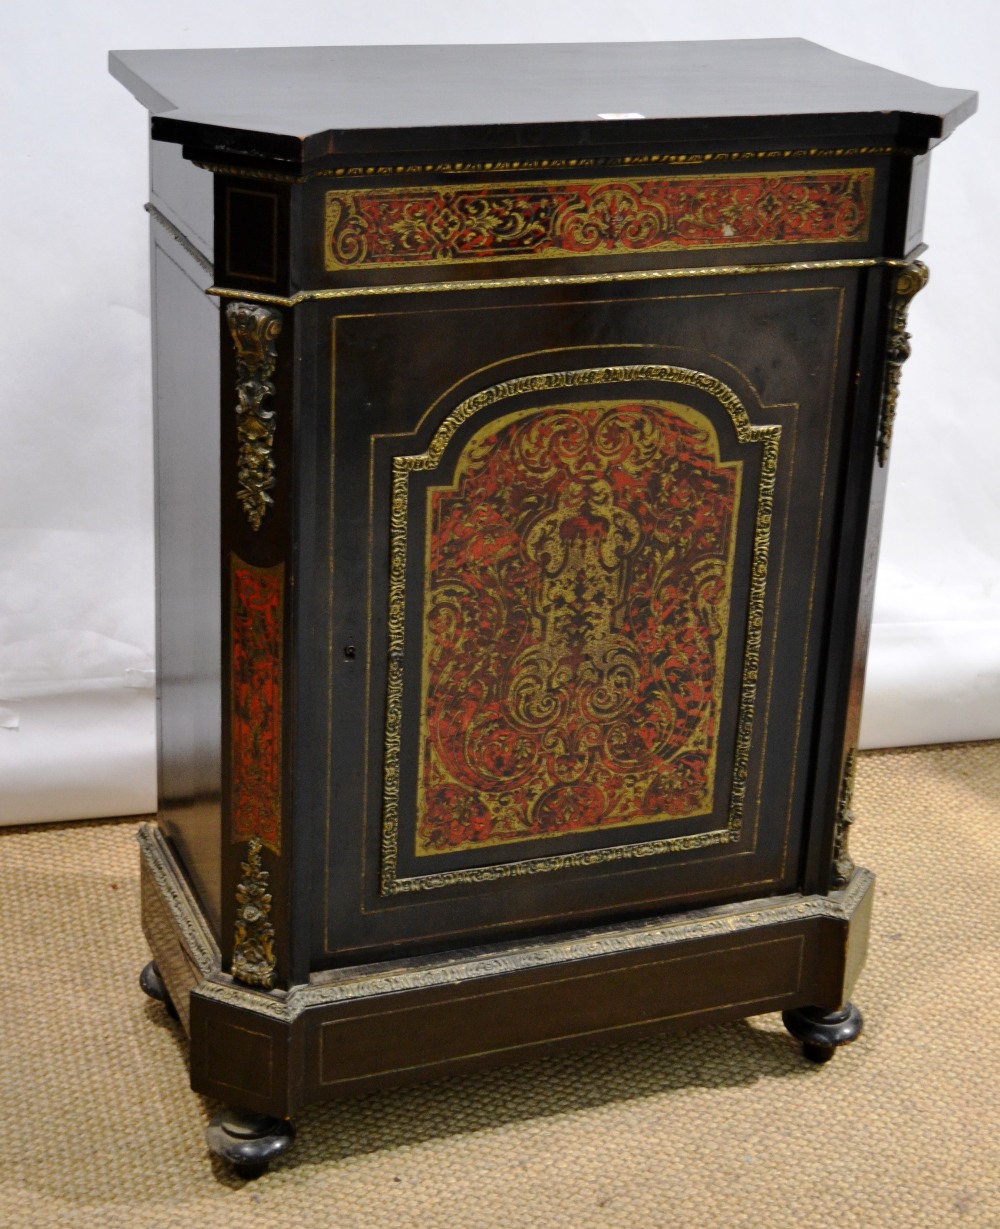 A nineteenth century French Pier cabinet, ebonized wood with brass stringing and chased ormolu